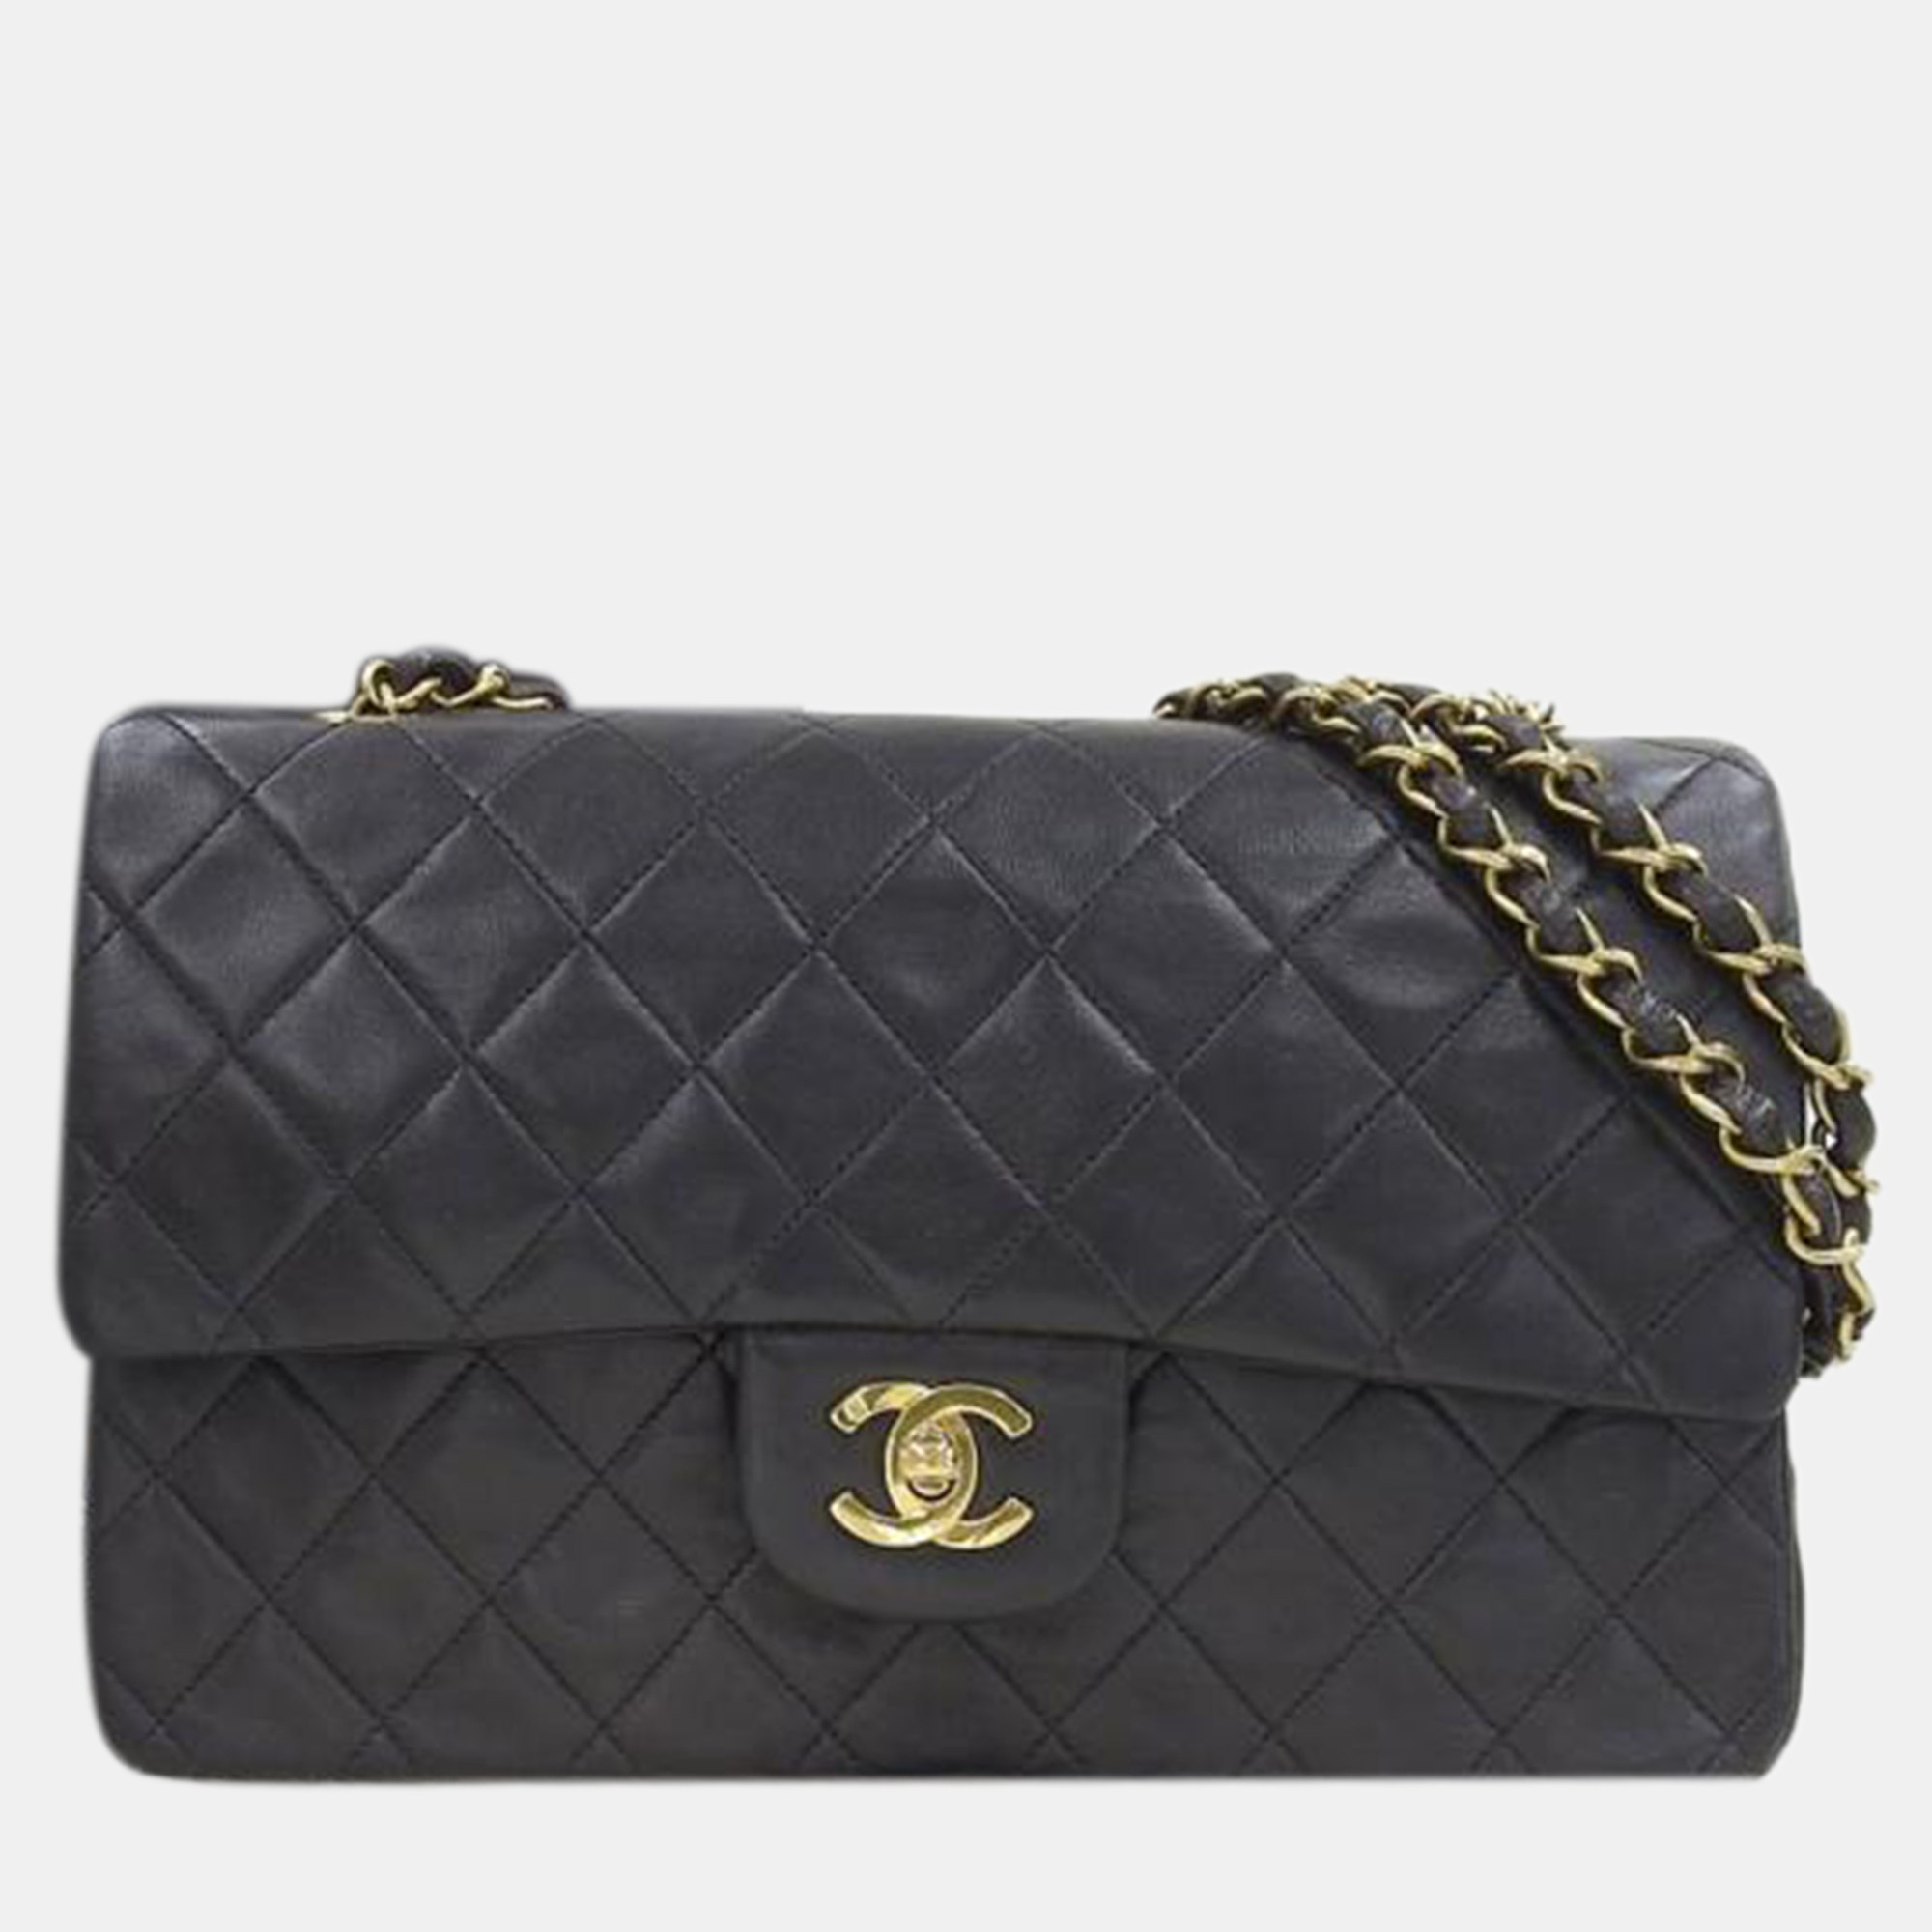 Chanel black lambskin leather small classic double flap shoulder bag